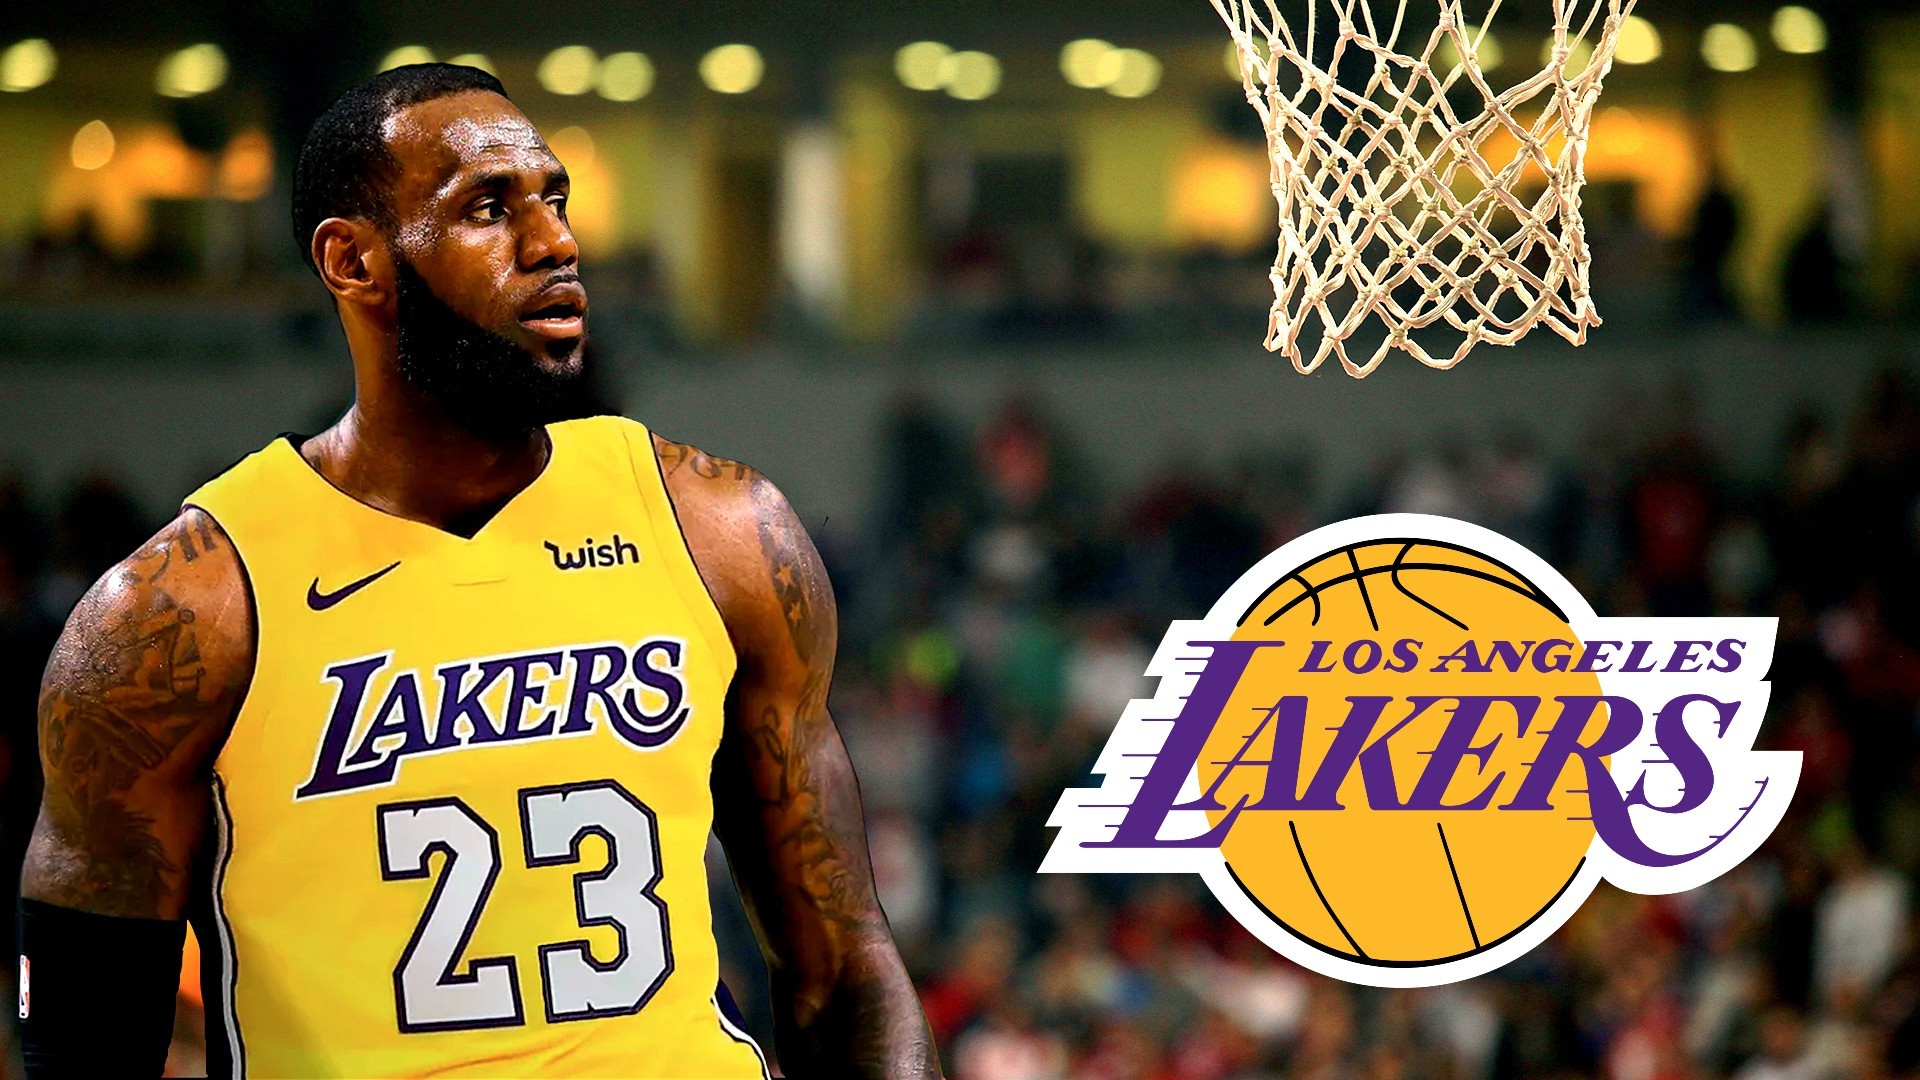 1920x1080 LeBron James Lakers Wallpaper with image dimensions  pixel. You  can make this wallpaper for